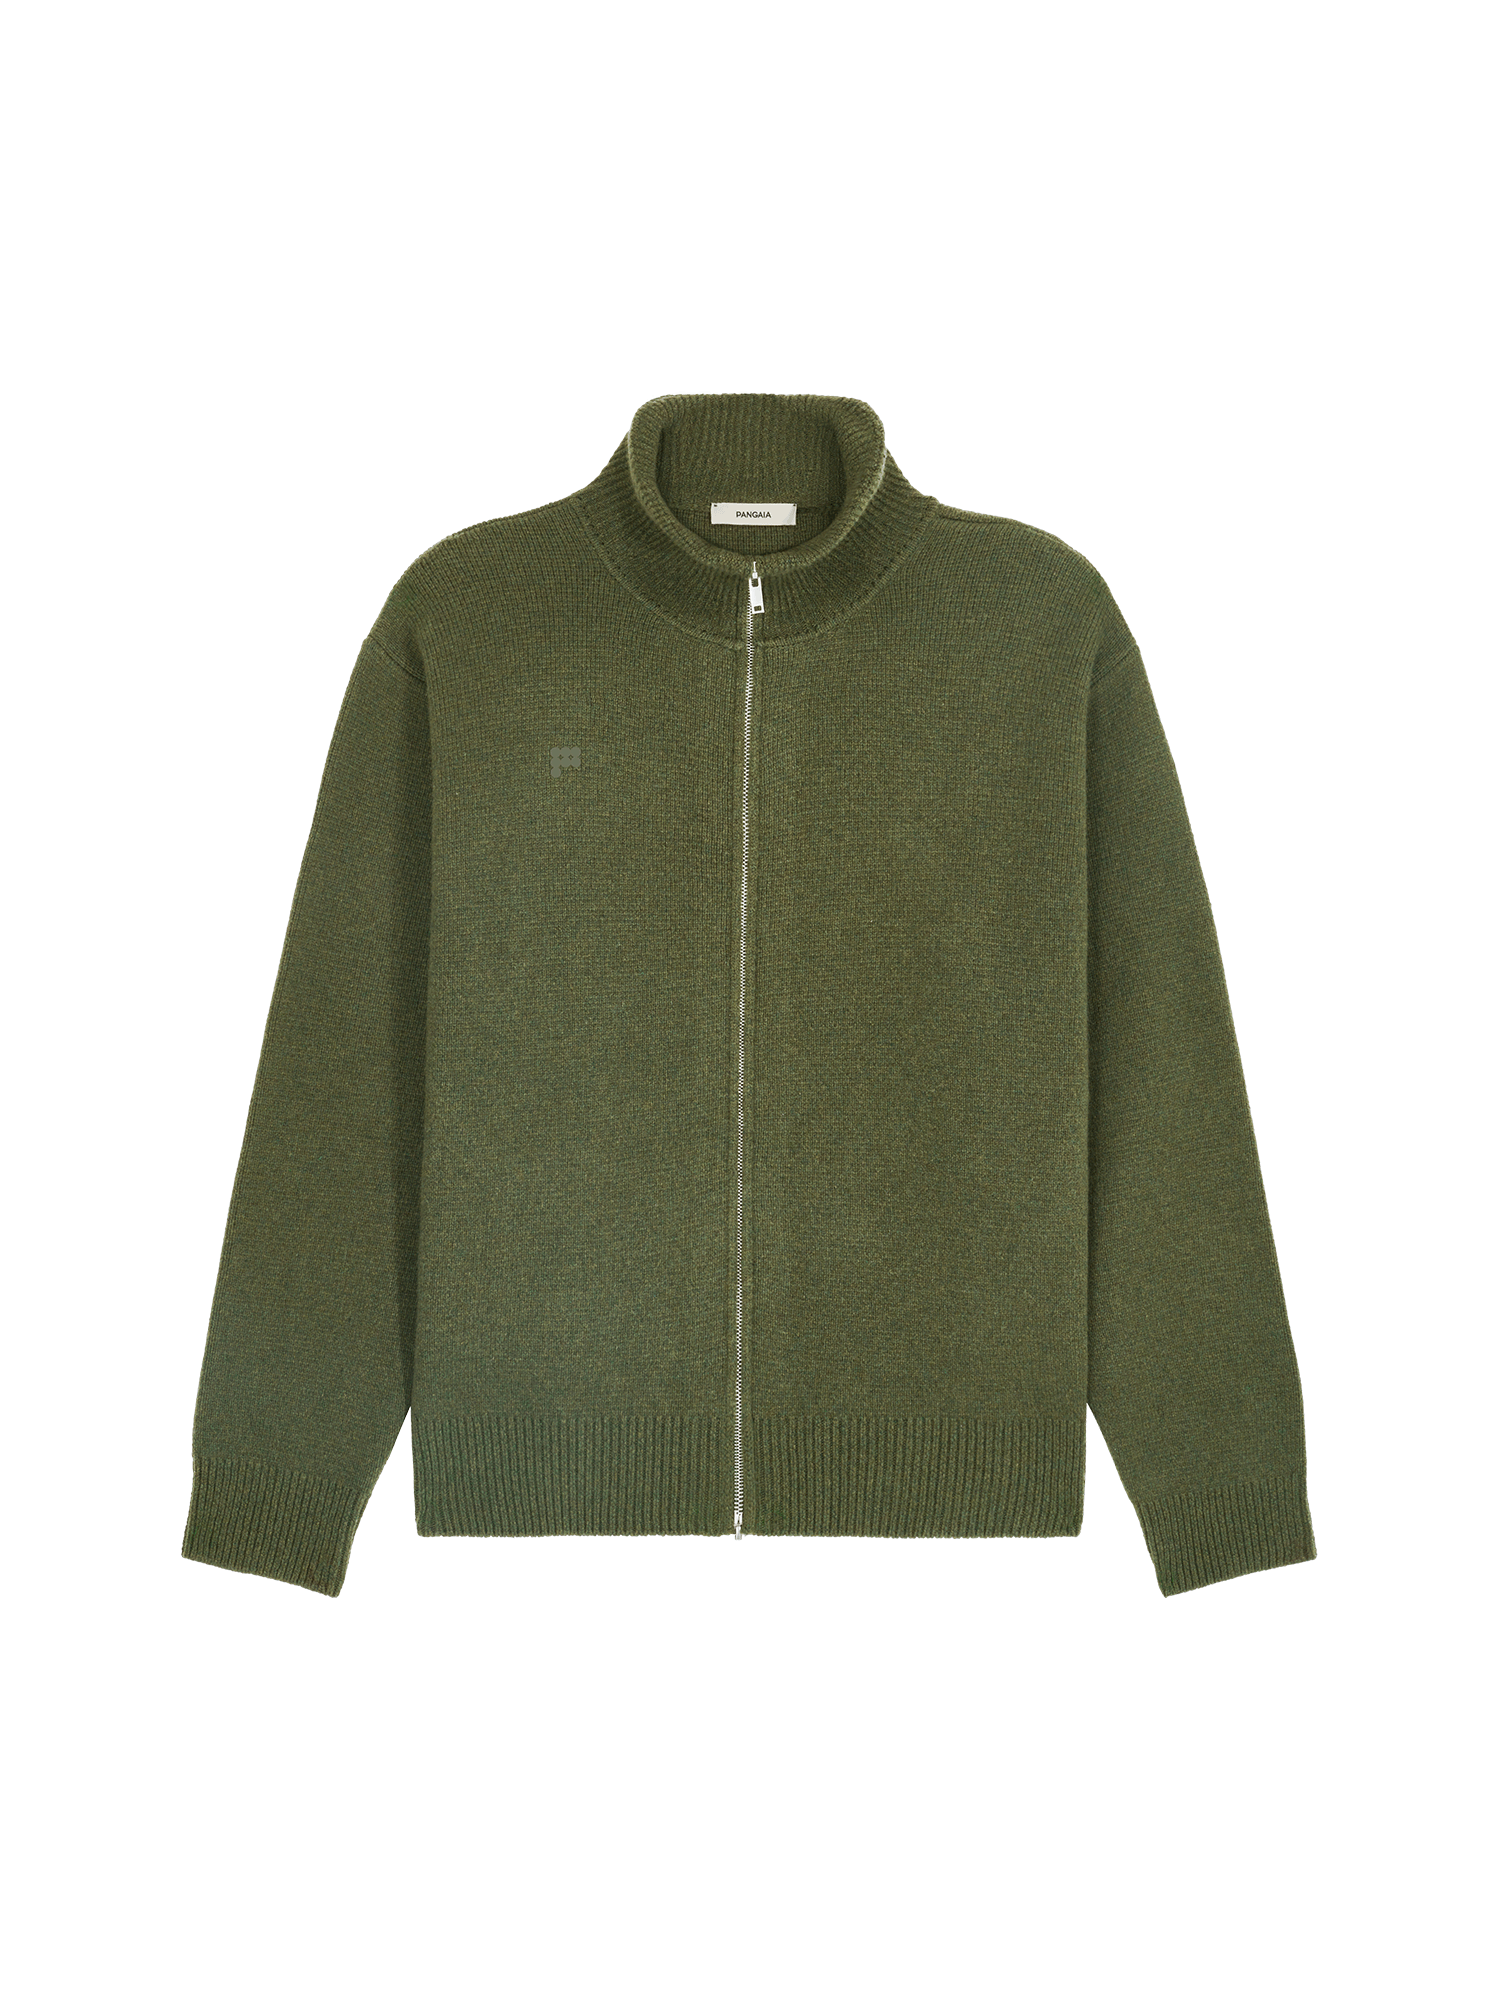 Mens_Recycled_Cashmere_Compact_Zipped_Sweater_Rosemary_Green-packshot-3